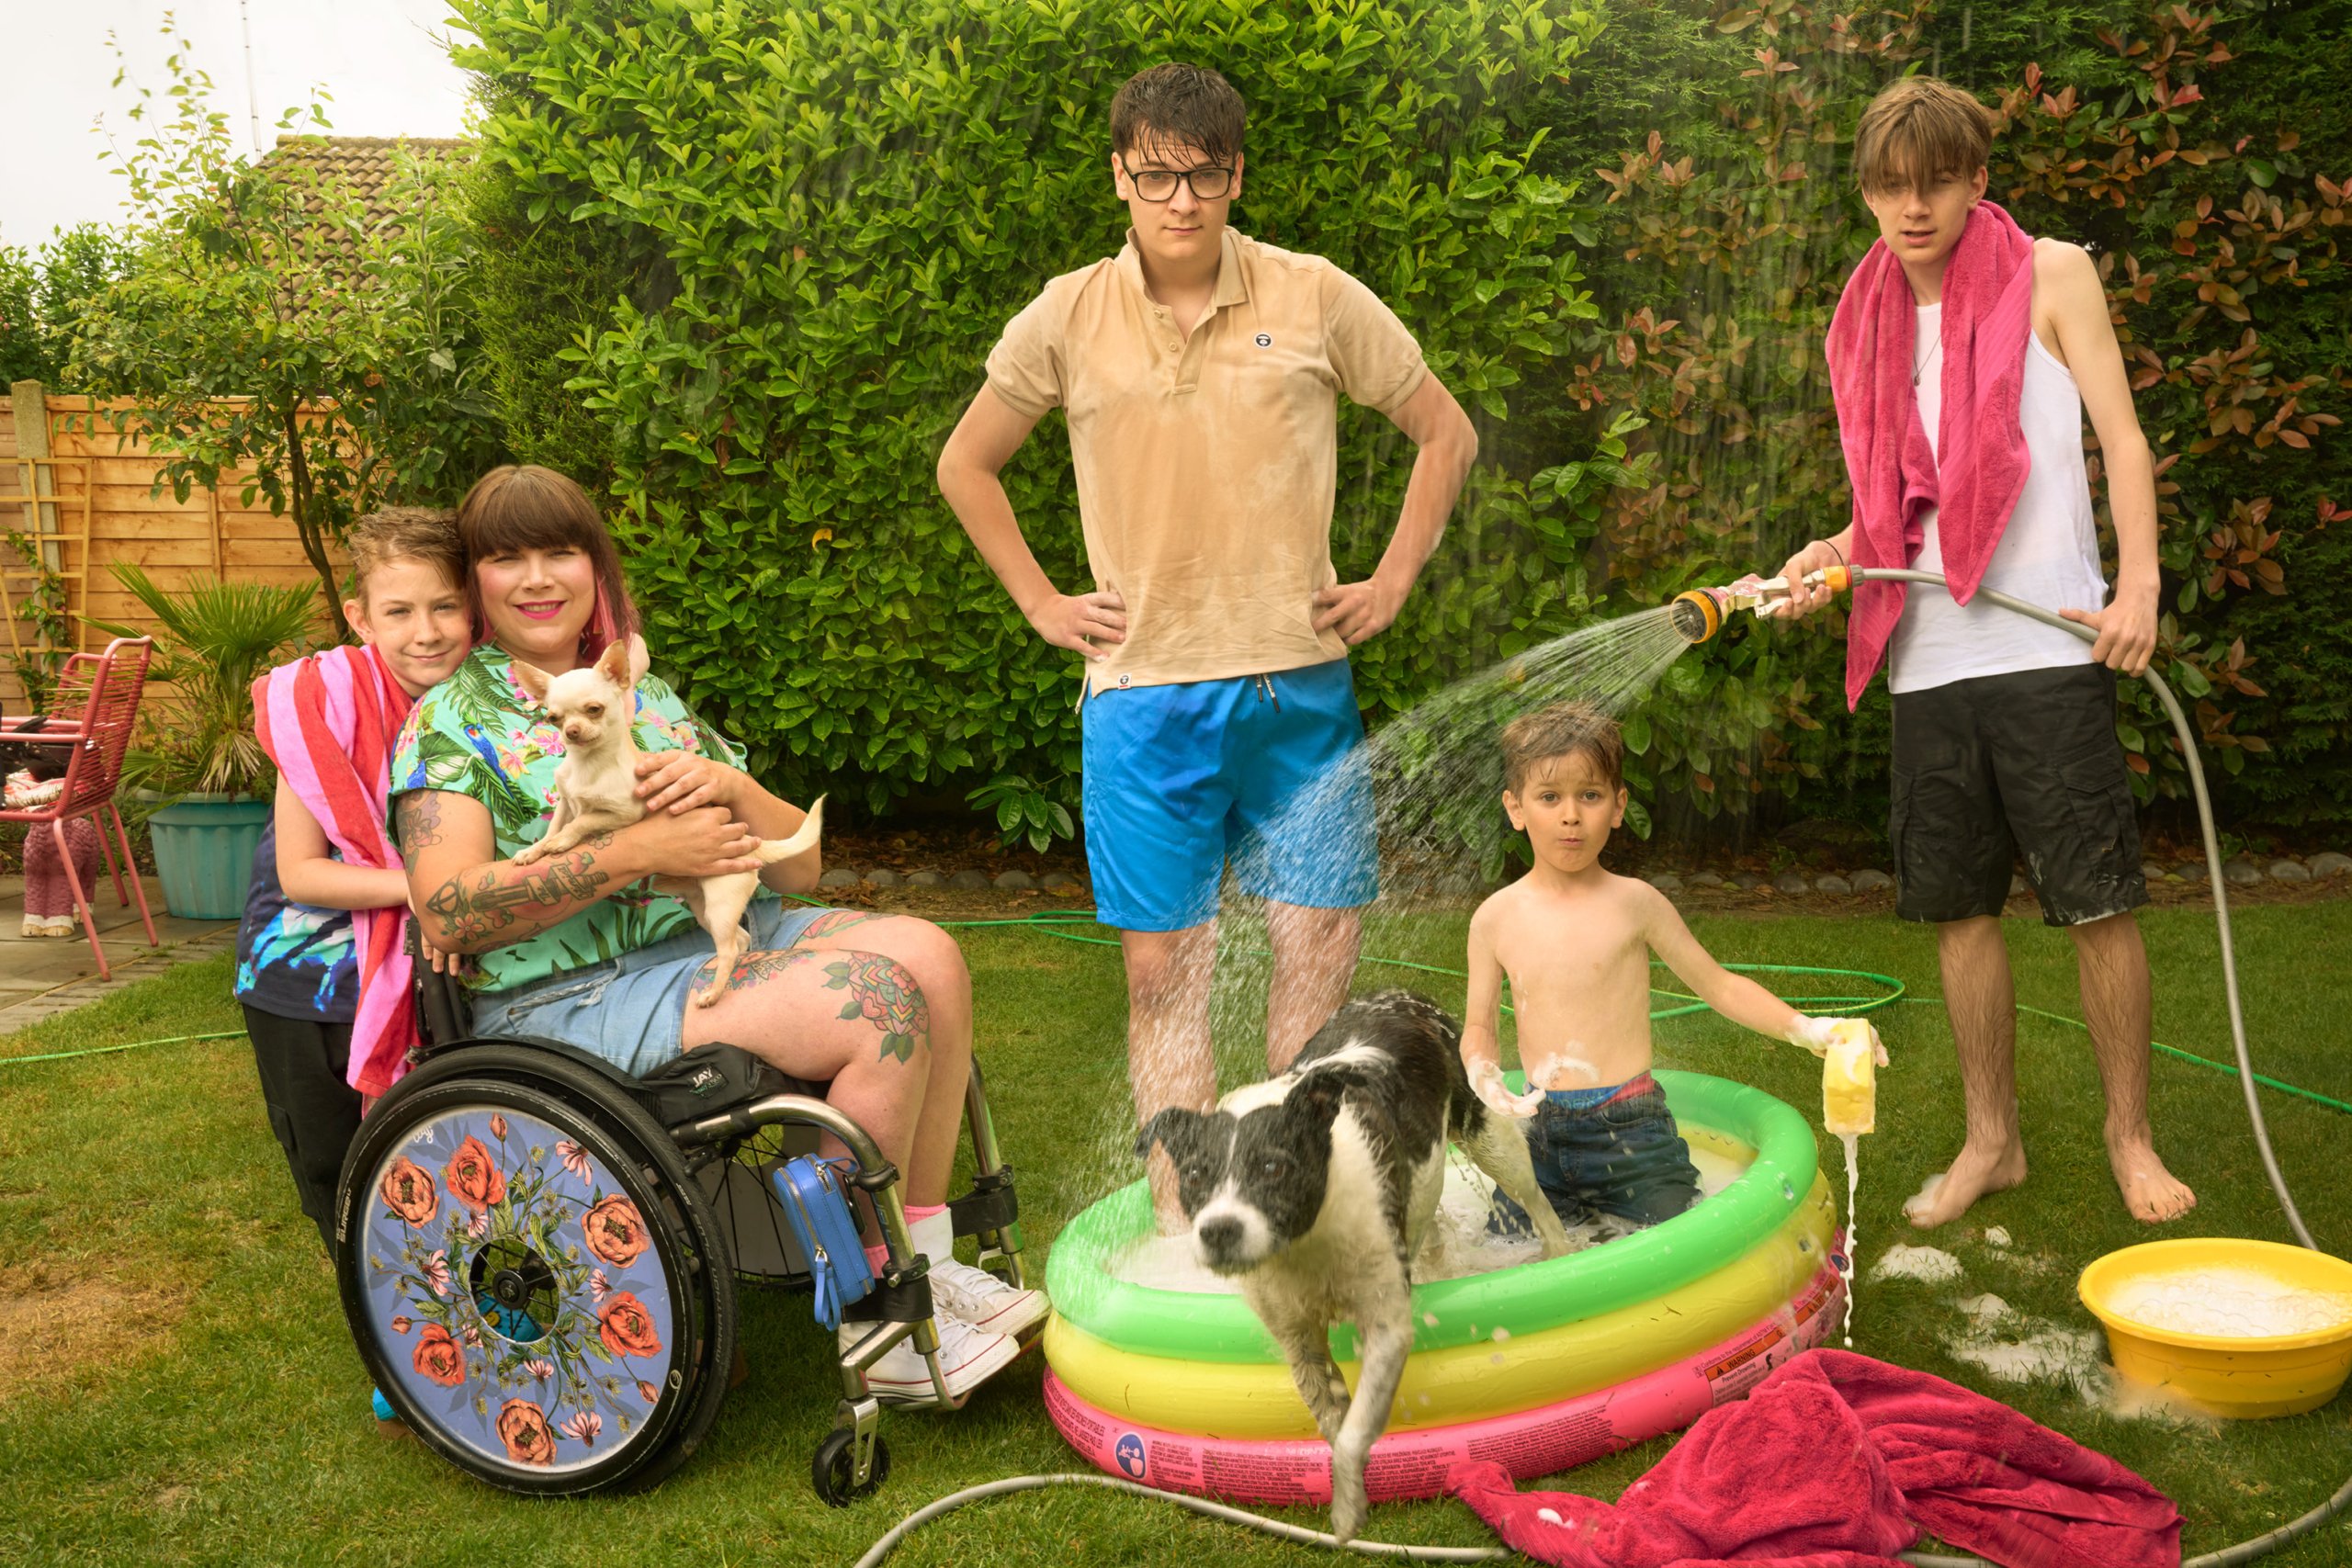 Nina in her garden surrounded by her four kids and their dogs, one of the boy's is filling an inflatable splash pool with water.